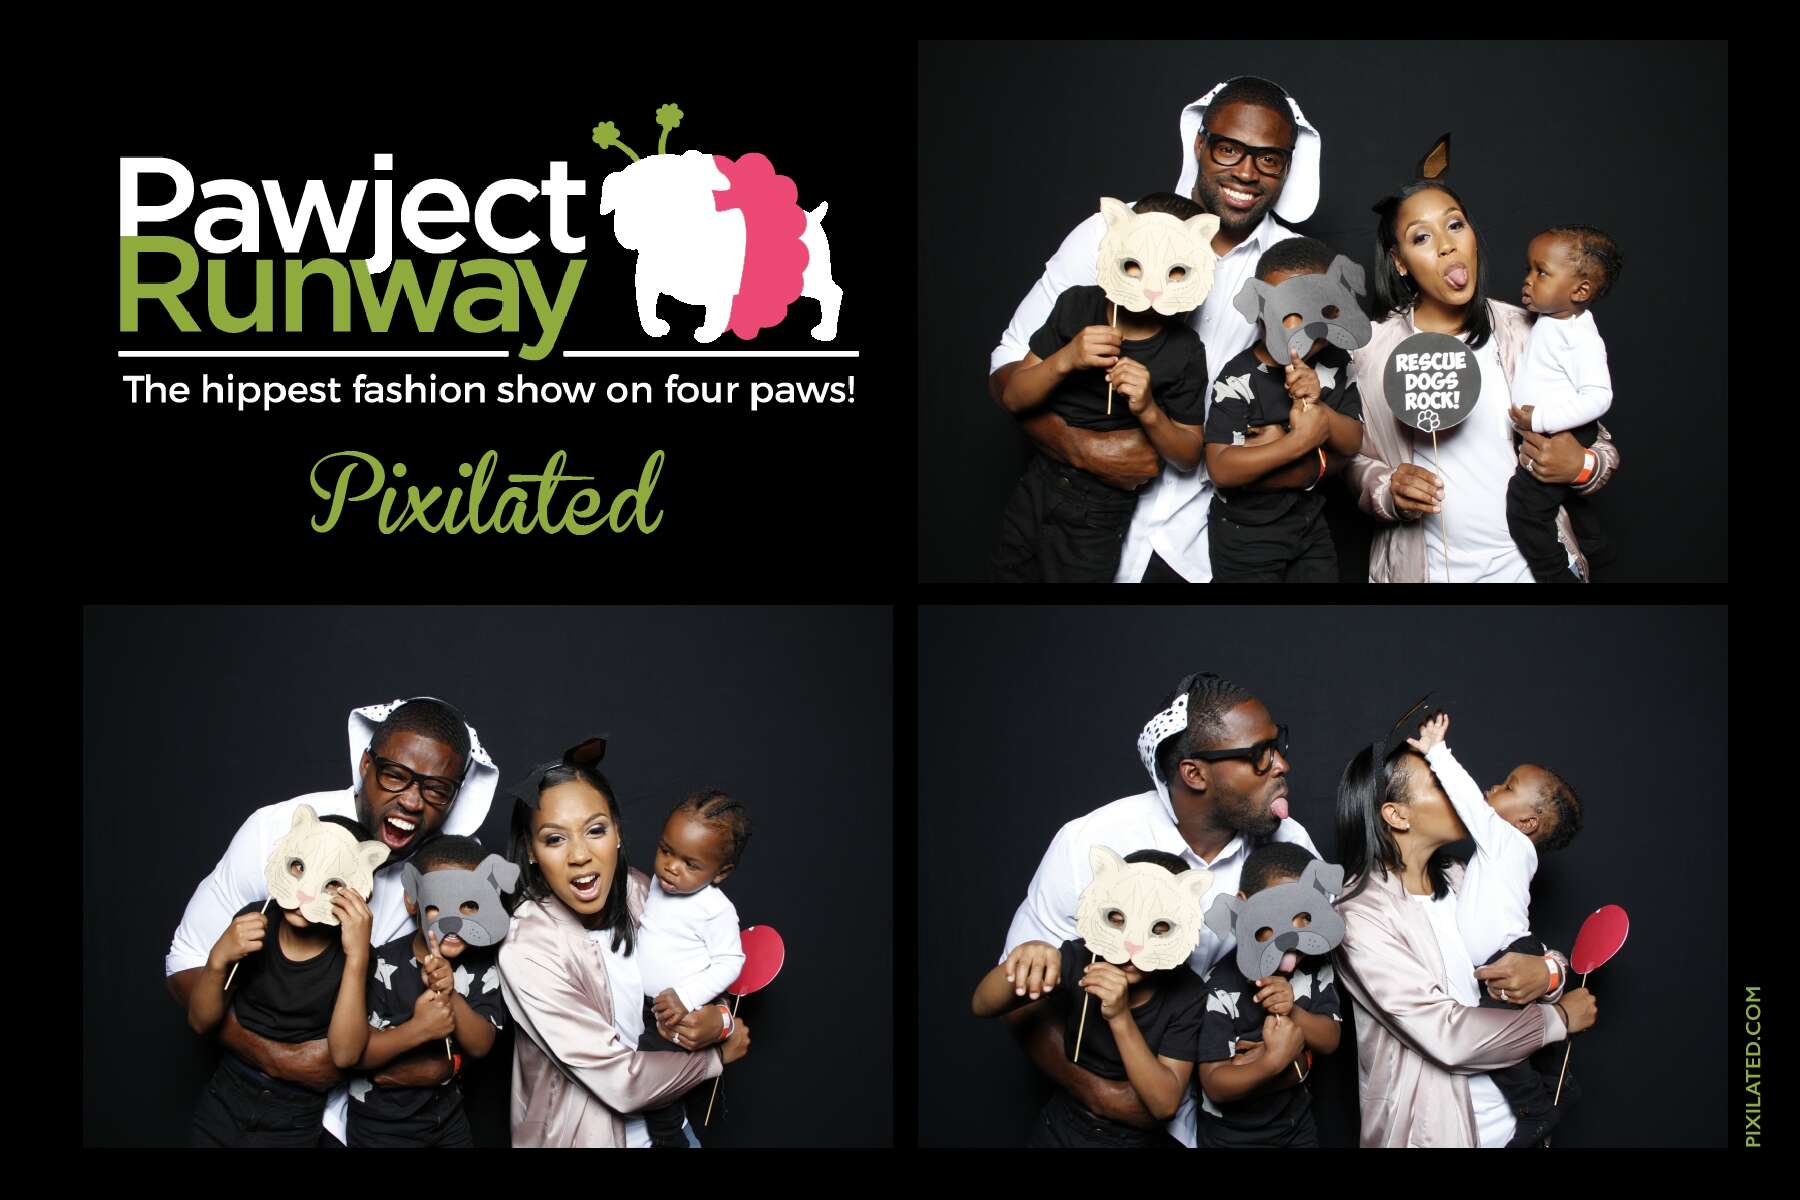 Torrey and Chanel Smith family having fun at the Pawject Runway photo booth